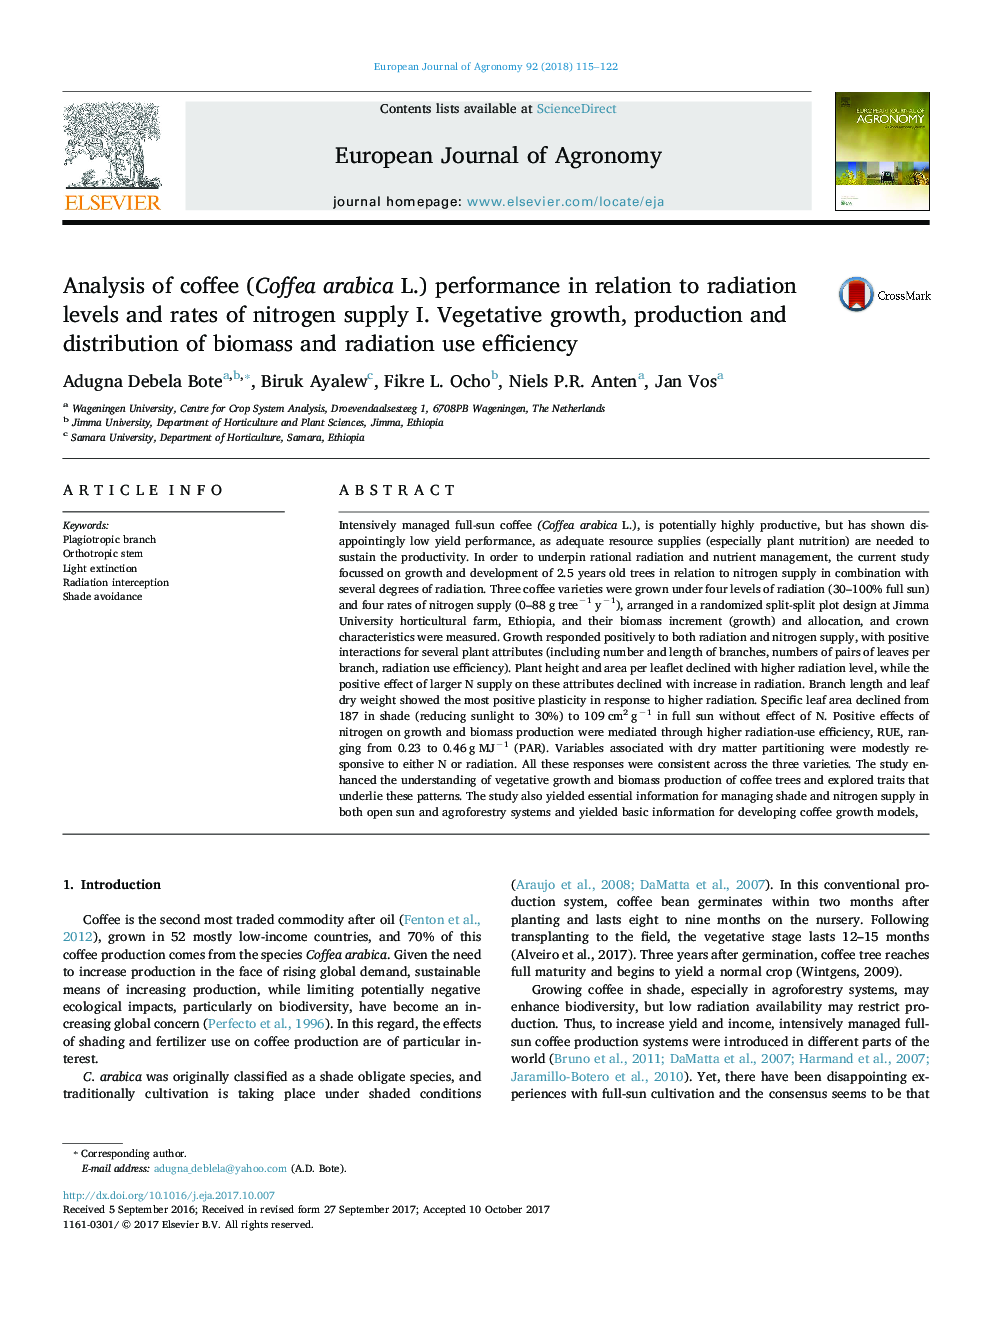 Analysis of coffee (Coffea arabica L.) performance in relation to radiation levels and rates of nitrogen supply I. Vegetative growth, production and distribution of biomass and radiation use efficiency